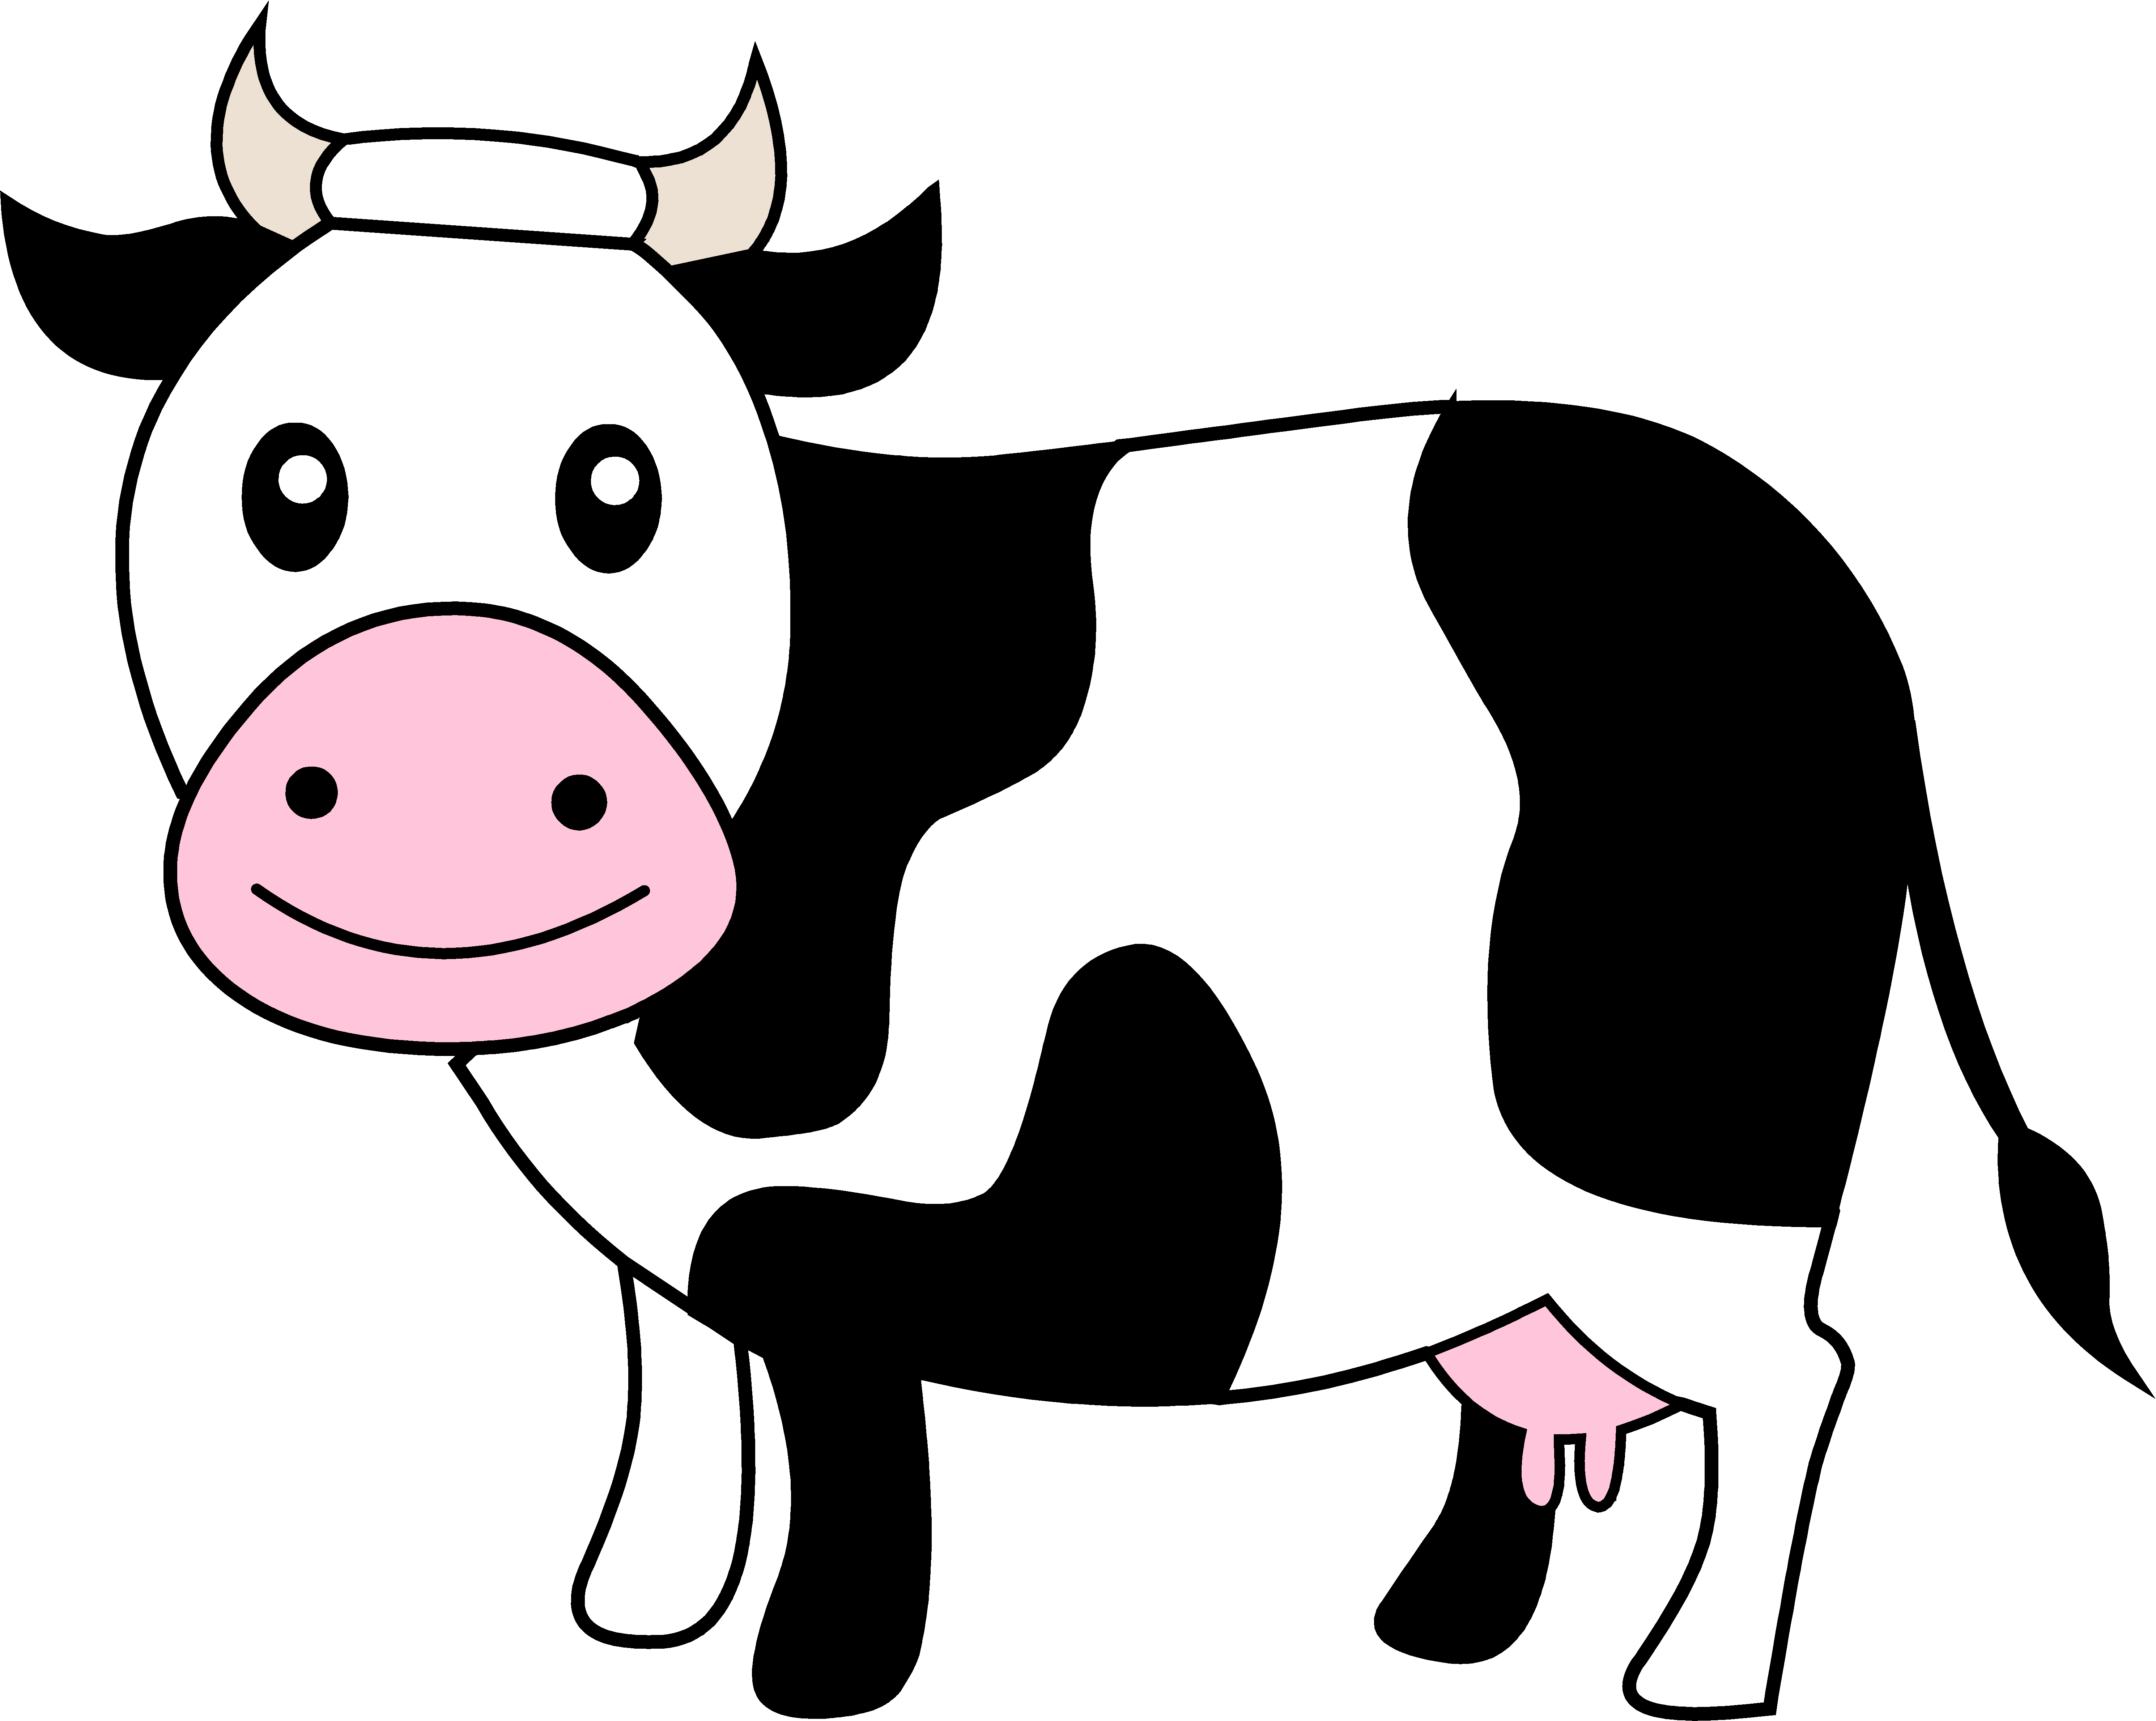 Cow Coloring Pages, Cow Face 